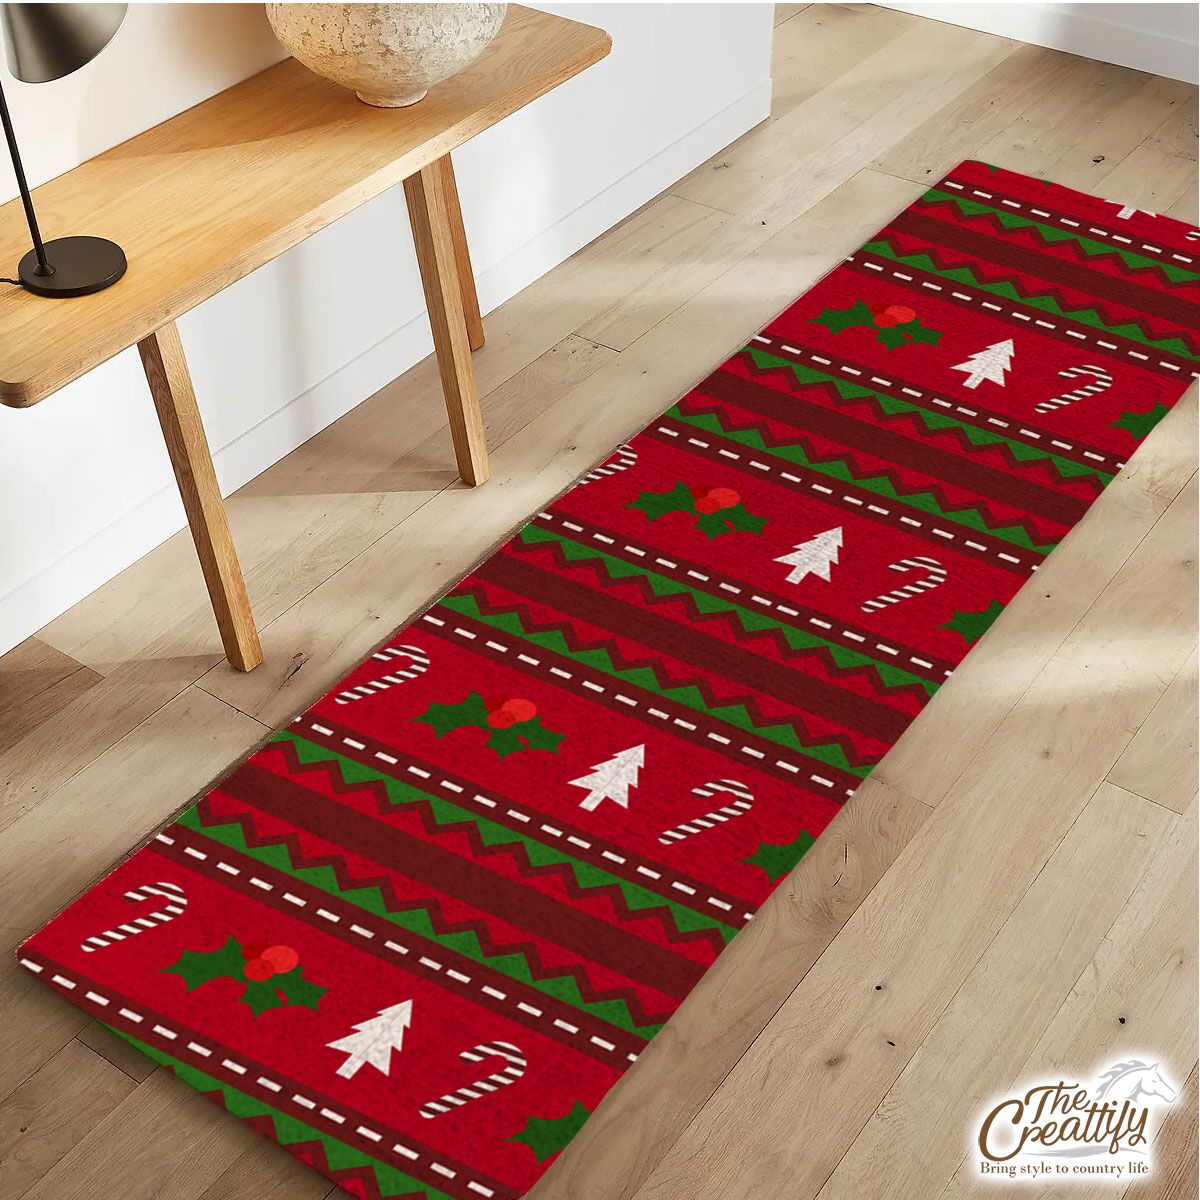 Red Green And White Christmas Tree, Holly Leaf With Candy Cane.jpg Runner Carpet